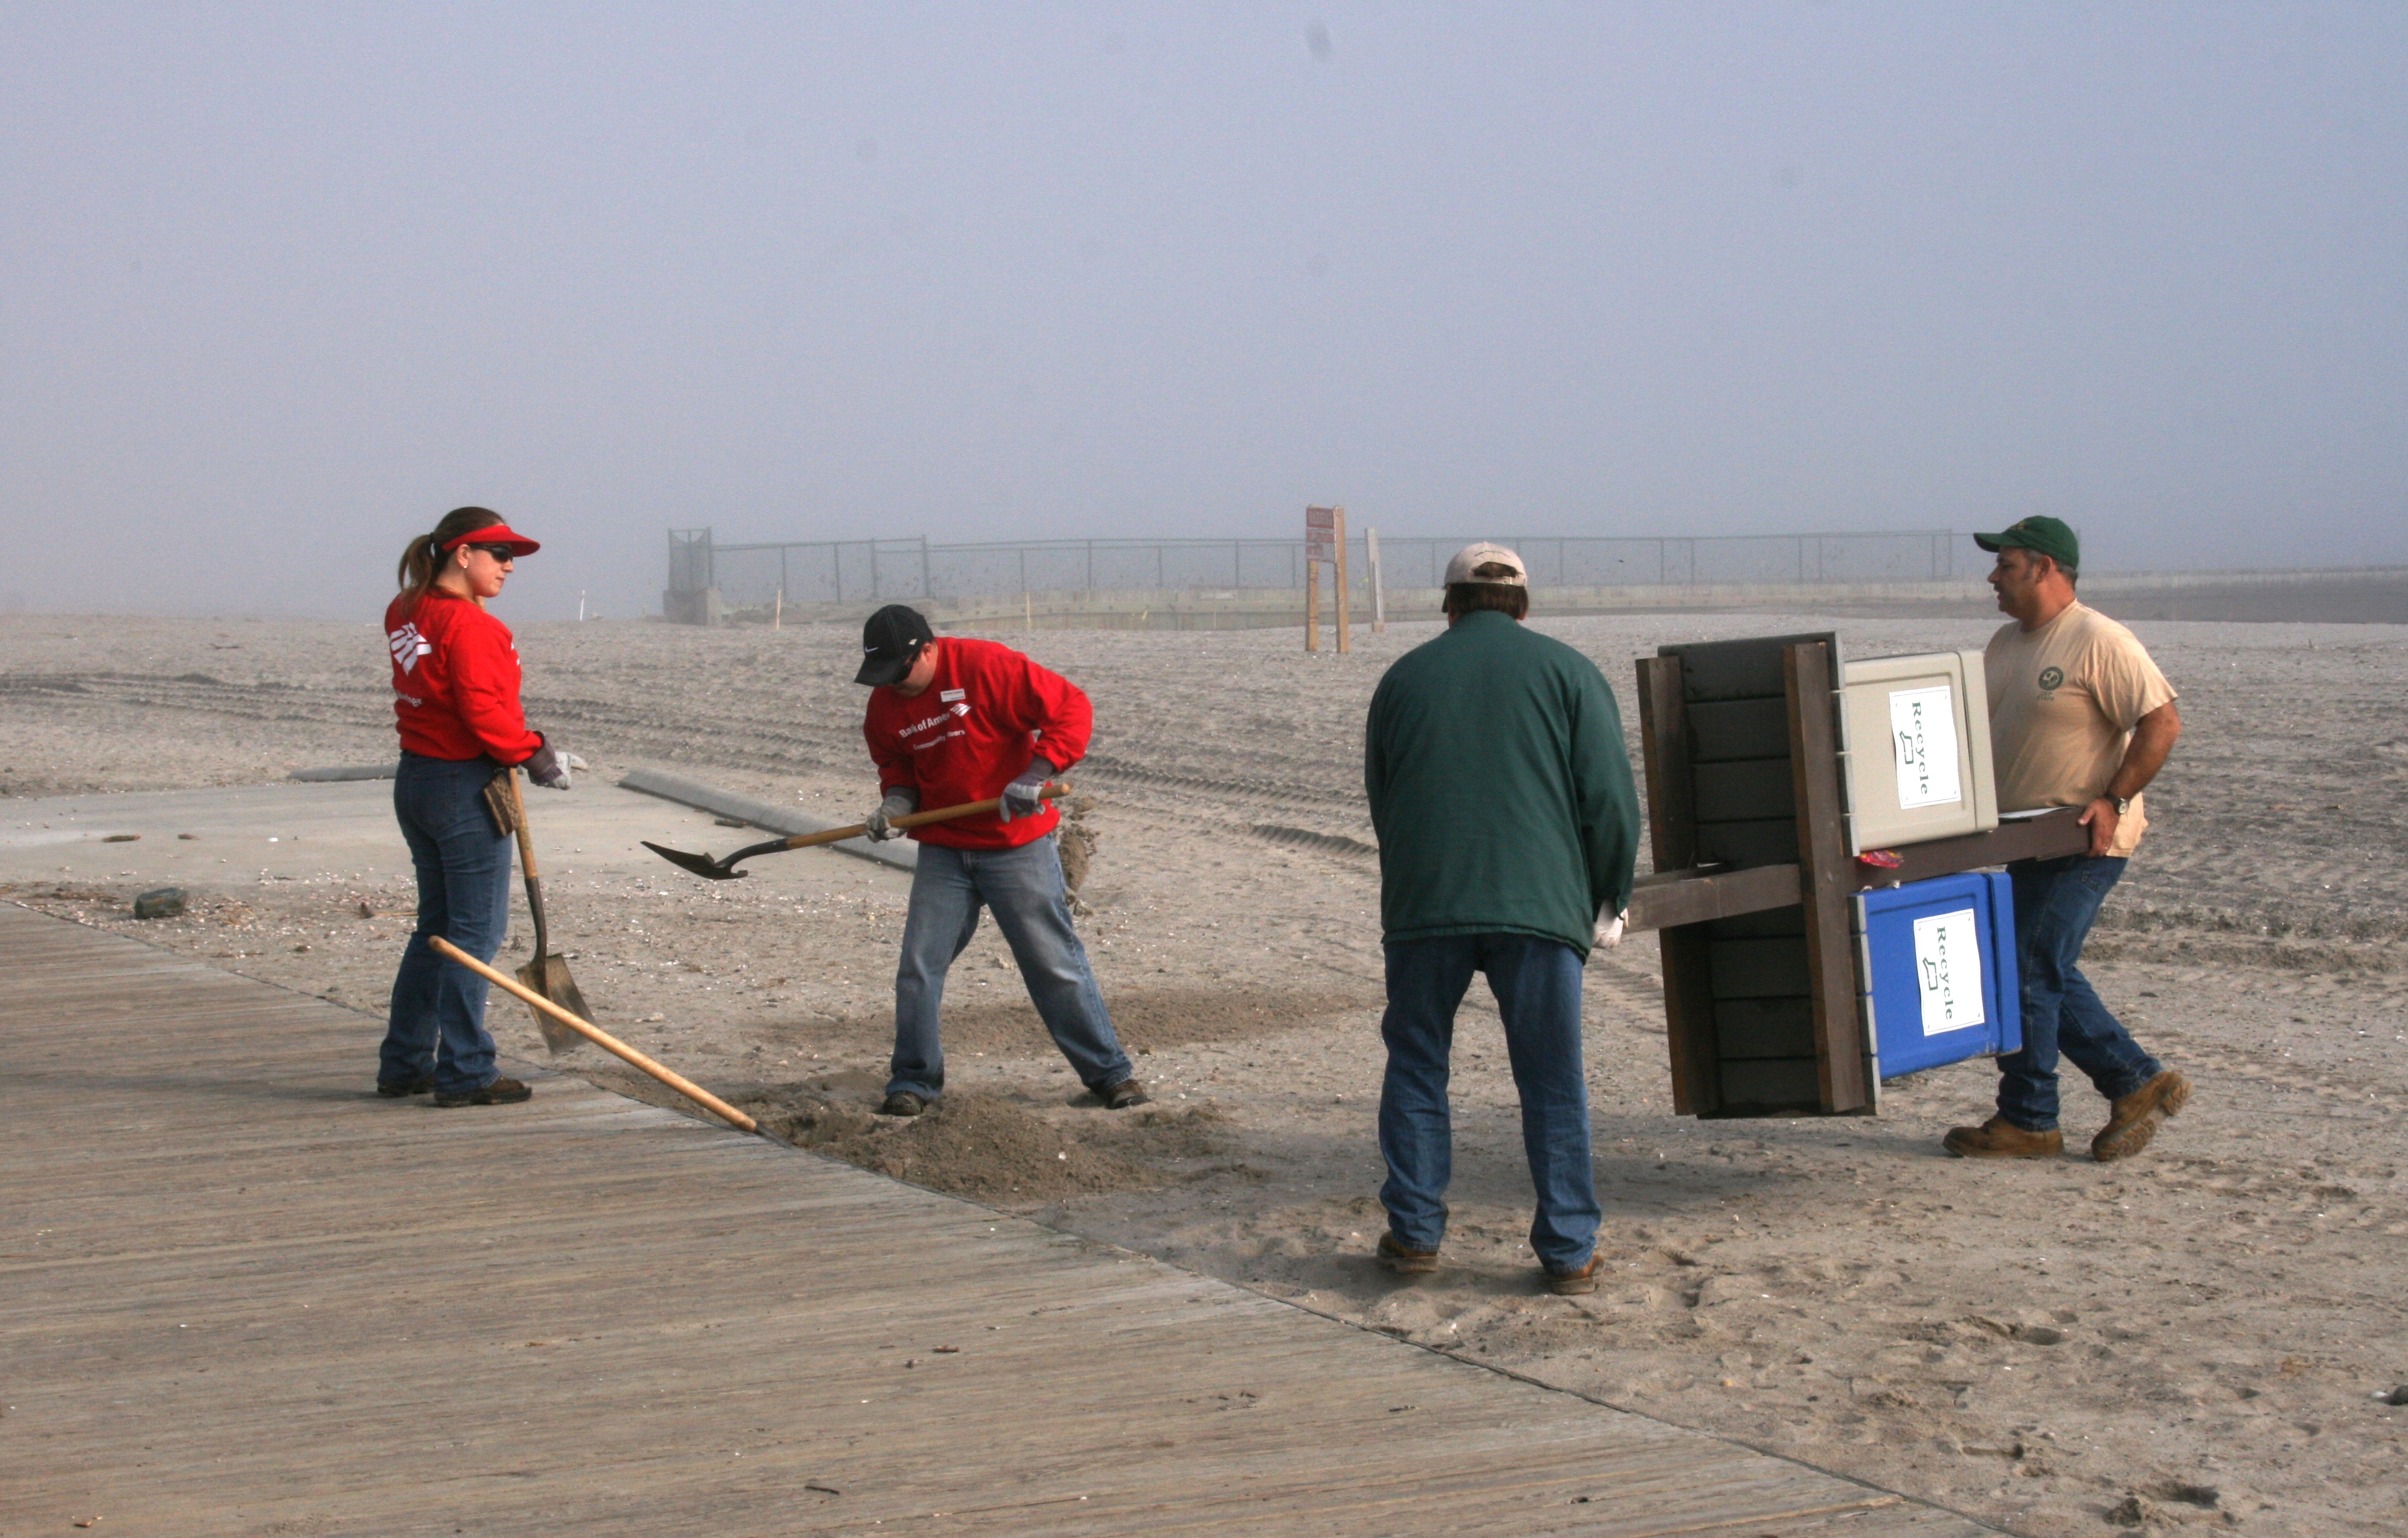 Bank of America volunteers removing debris from Silver Sands after Hurricane Sandy